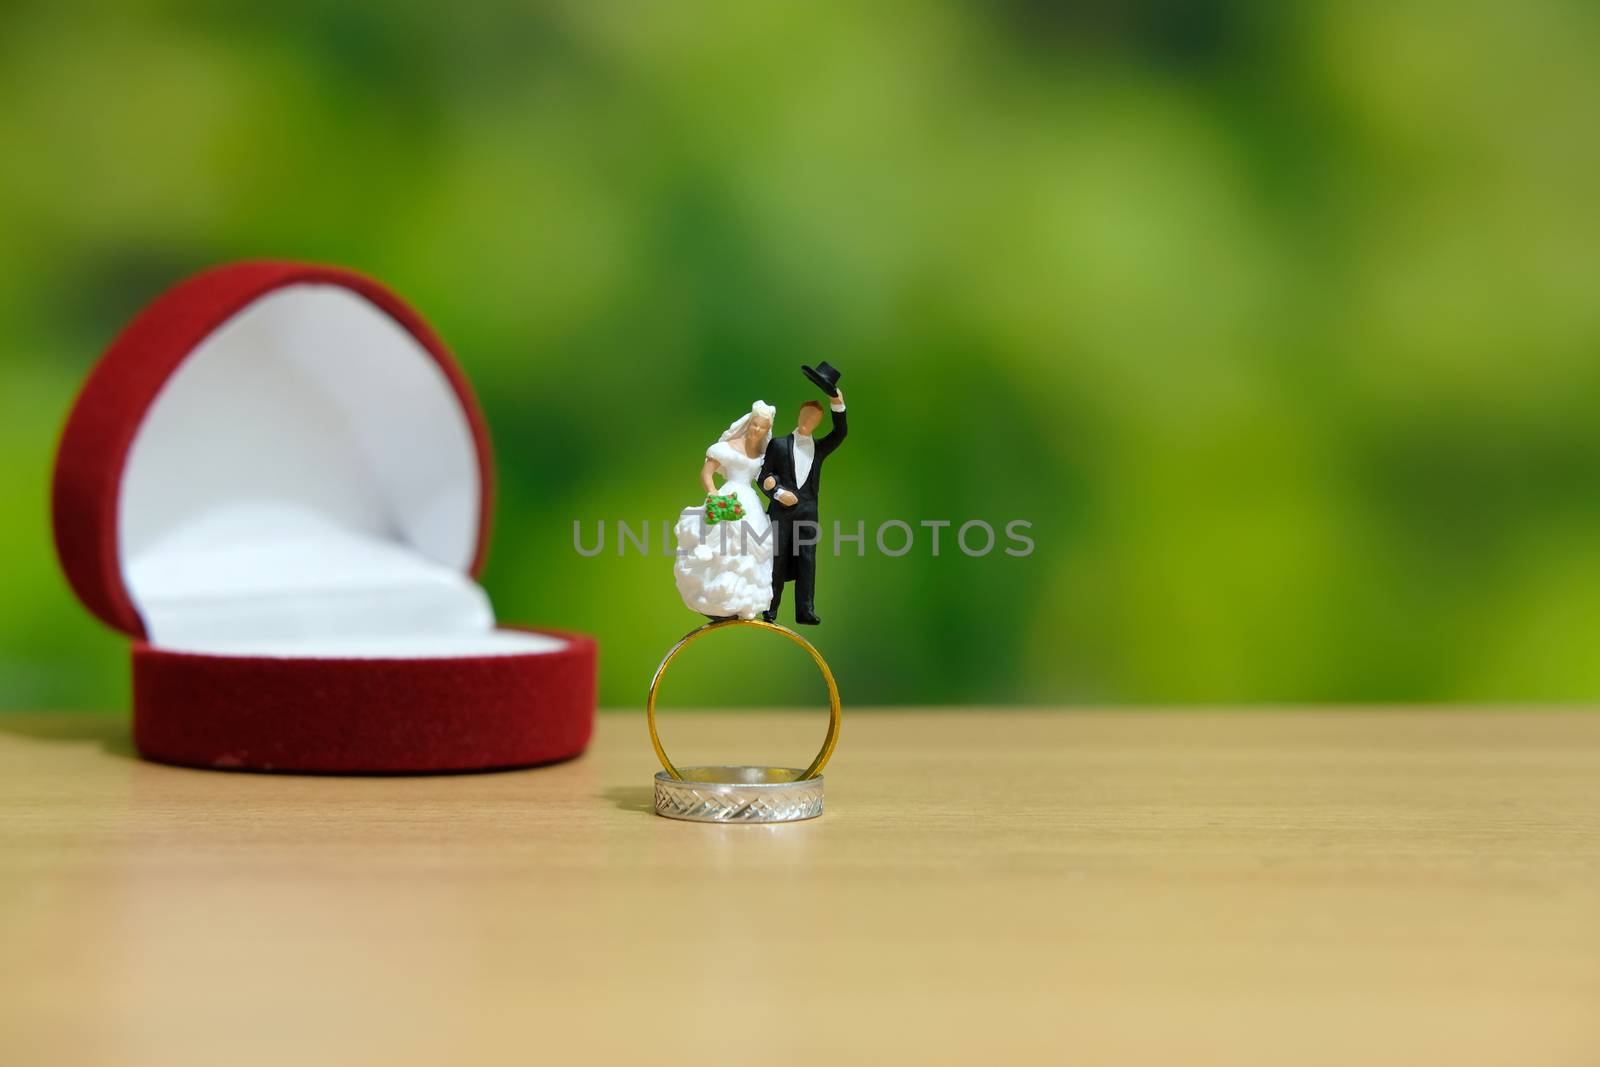 Miniature wedding concept. Bride and groom make greeting from above golden ring with dreamy green background